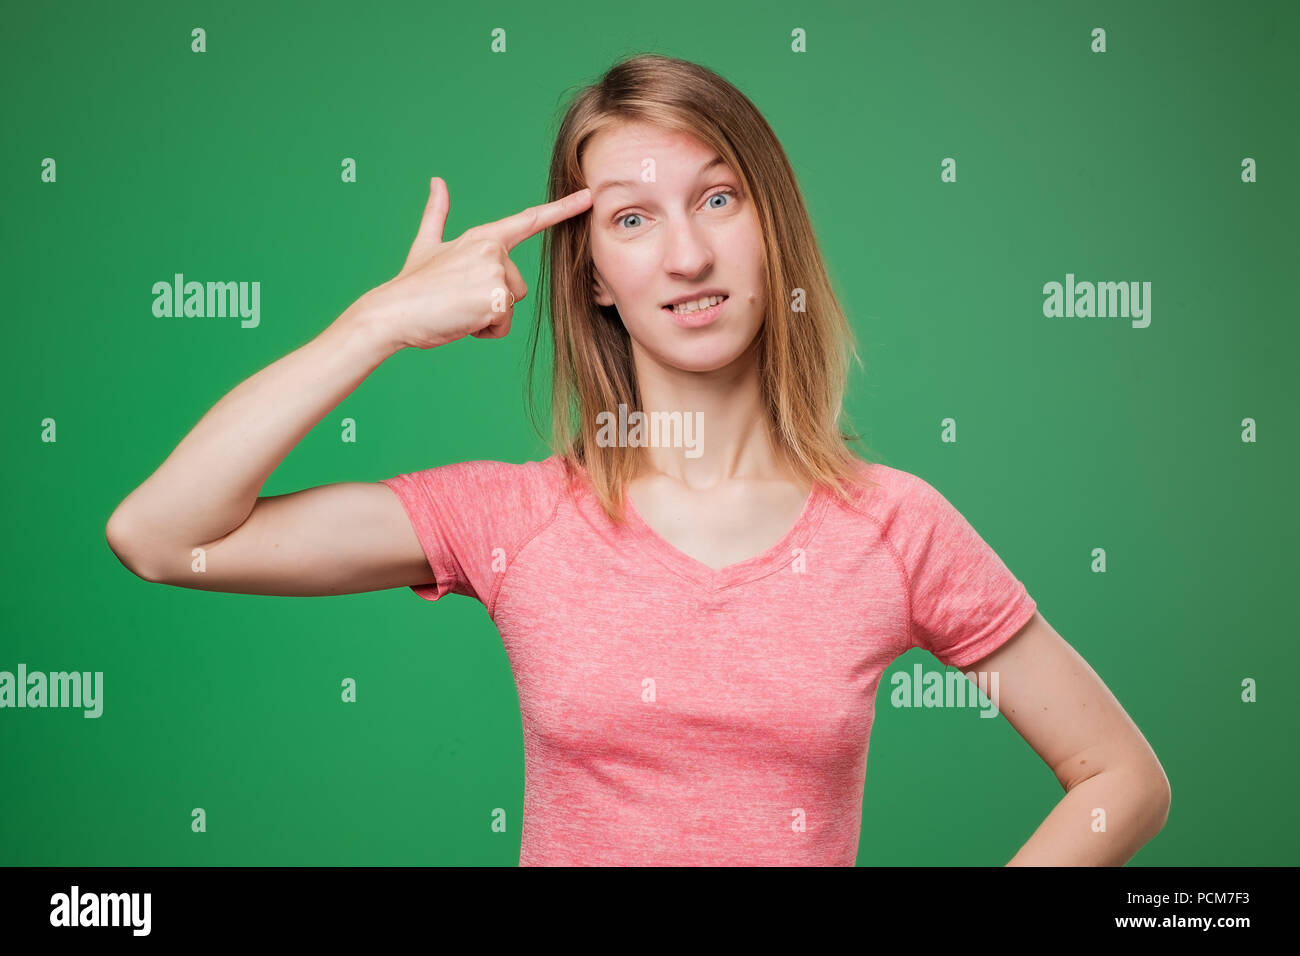 Image of european woman emotionally putting fingers to her temple like gun, being puzzled over green wall. Stock Photo